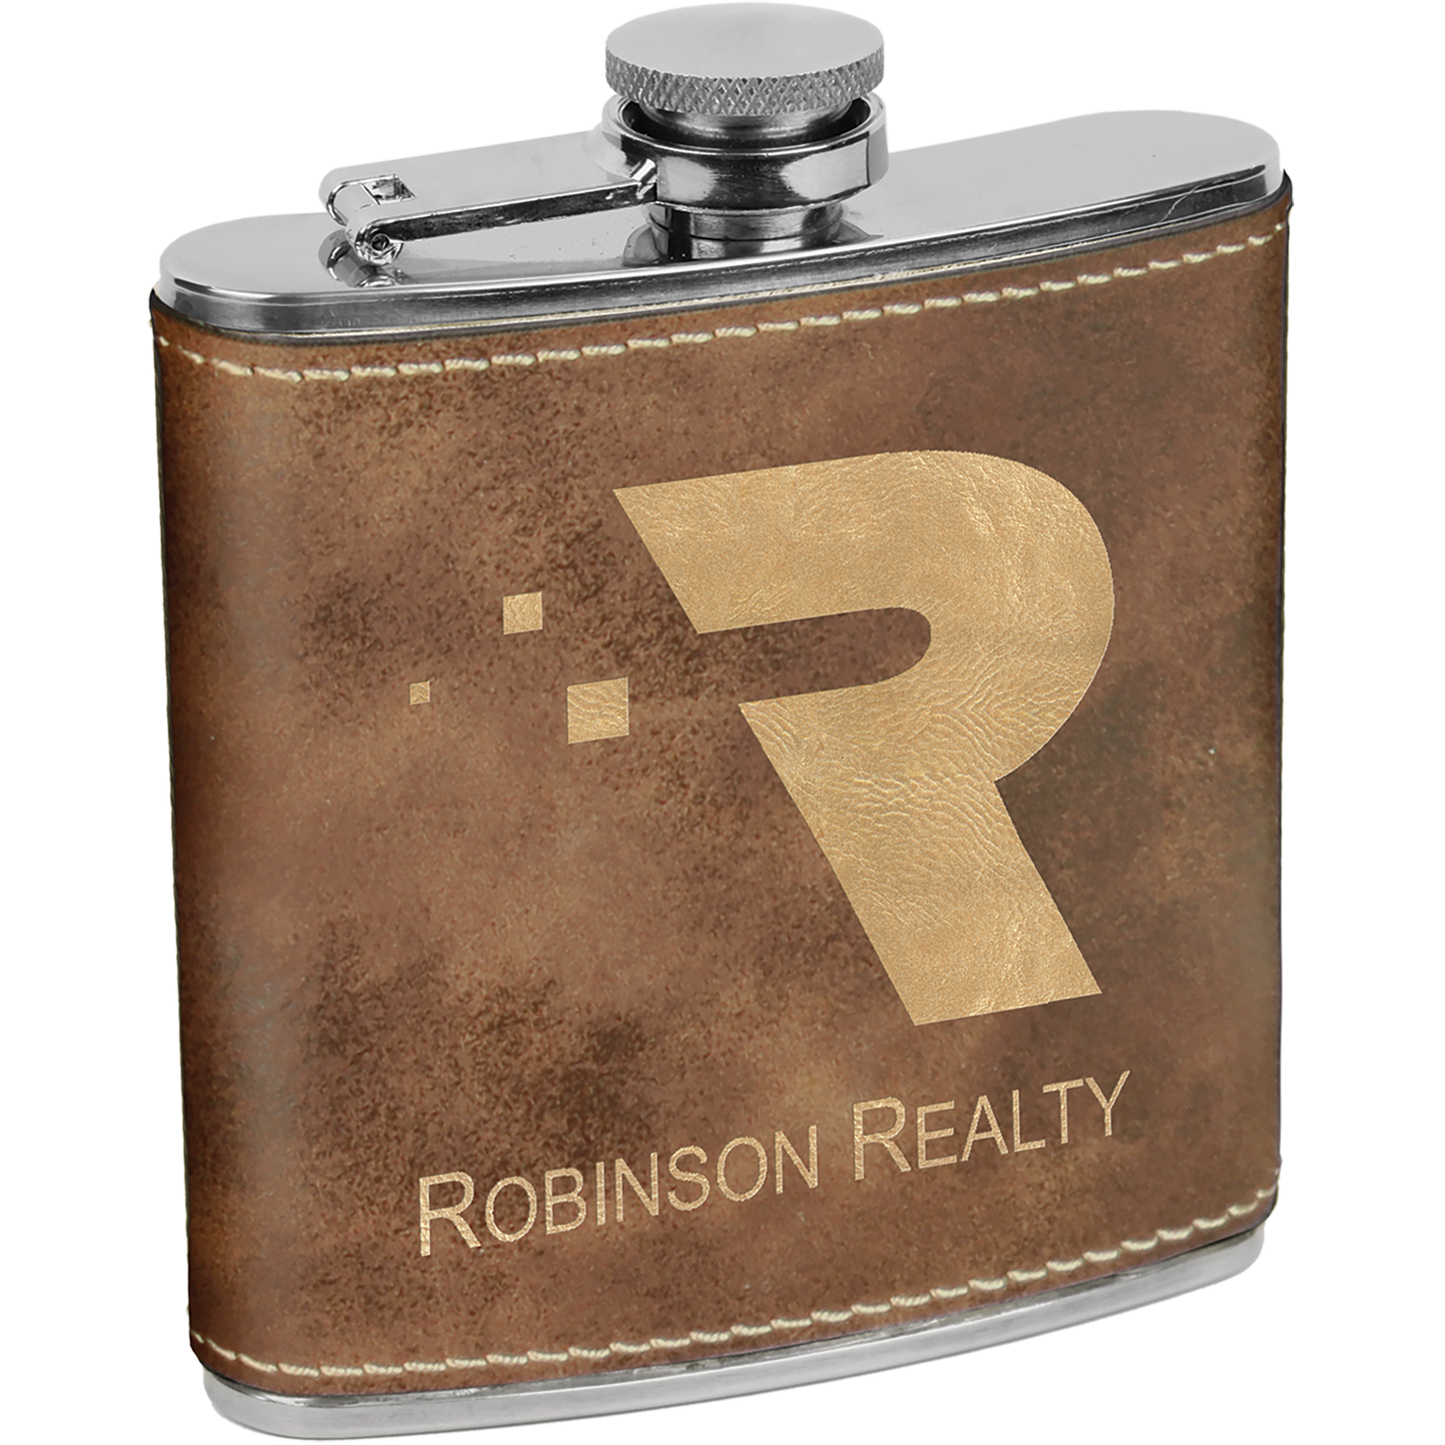 Customizable 6oz Stainless Steel Flask, Wrapped in Resilient Vegan Leather